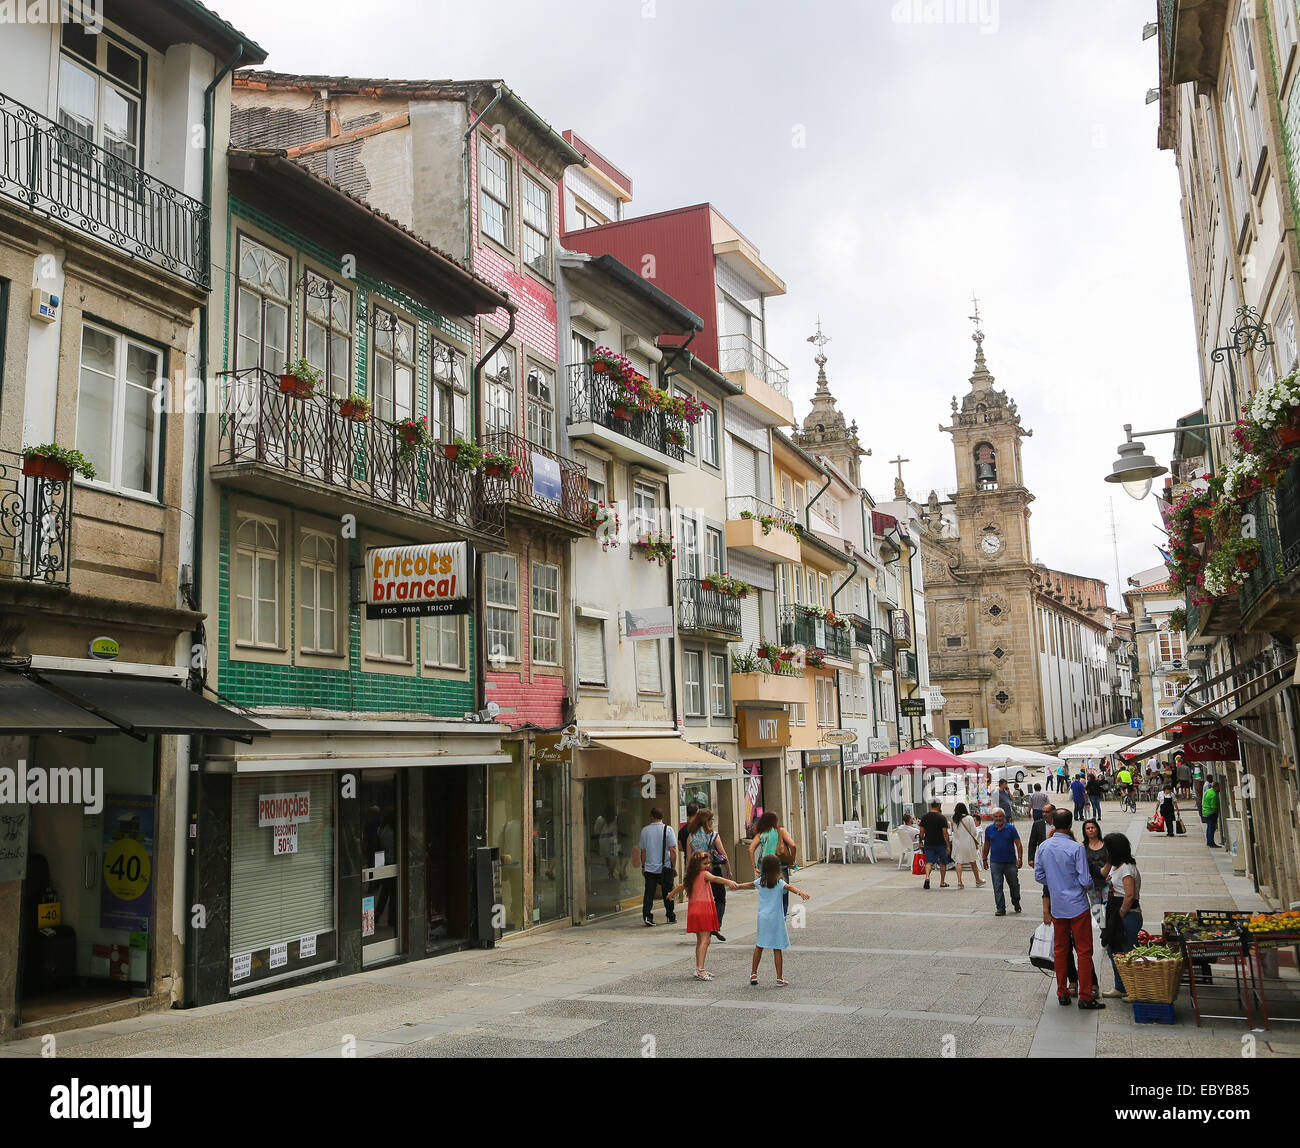 BRAGA, PORTUGAL - AUGUST 9, 2014: Typical street and architecture in the center of Braga, Portugal. Stock Photo